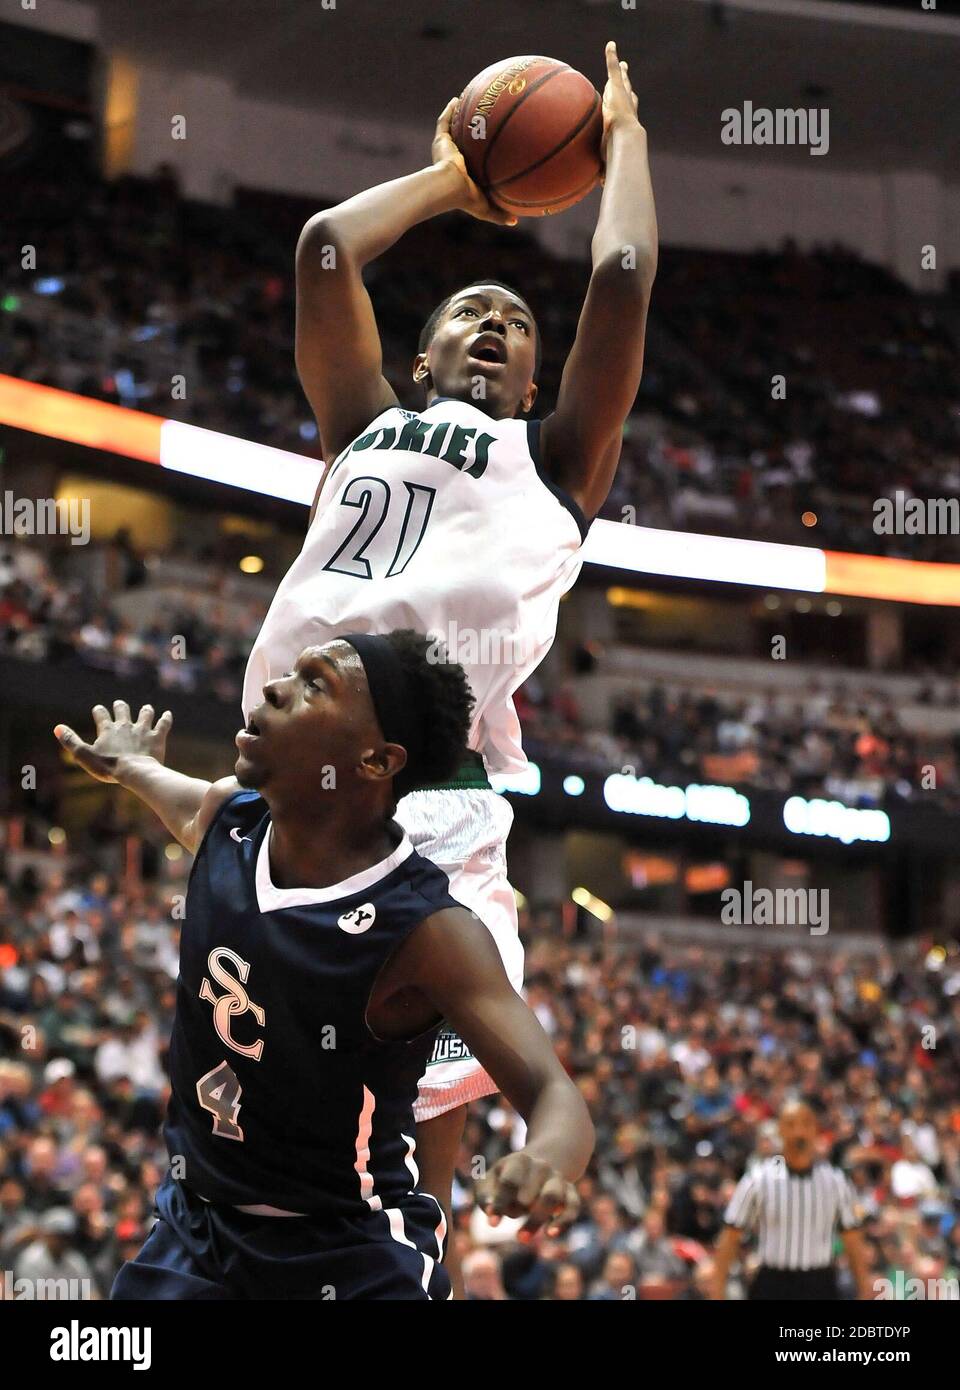 Anaheim, CA. 5th Mar, 2016. Onyeka Okongwu #21 in action during the CIF-SS Open division Final Boys Prep Basketball game.between Chino Hills and Sierra Canyon at the Honda Center in Anaheim California.Chino Hills defeats Sierra Canyon 105-83.Mandatory Photo Credit: Louis Lopez/Modern Exposure/Cal Sport Media/Alamy Live News Stock Photo